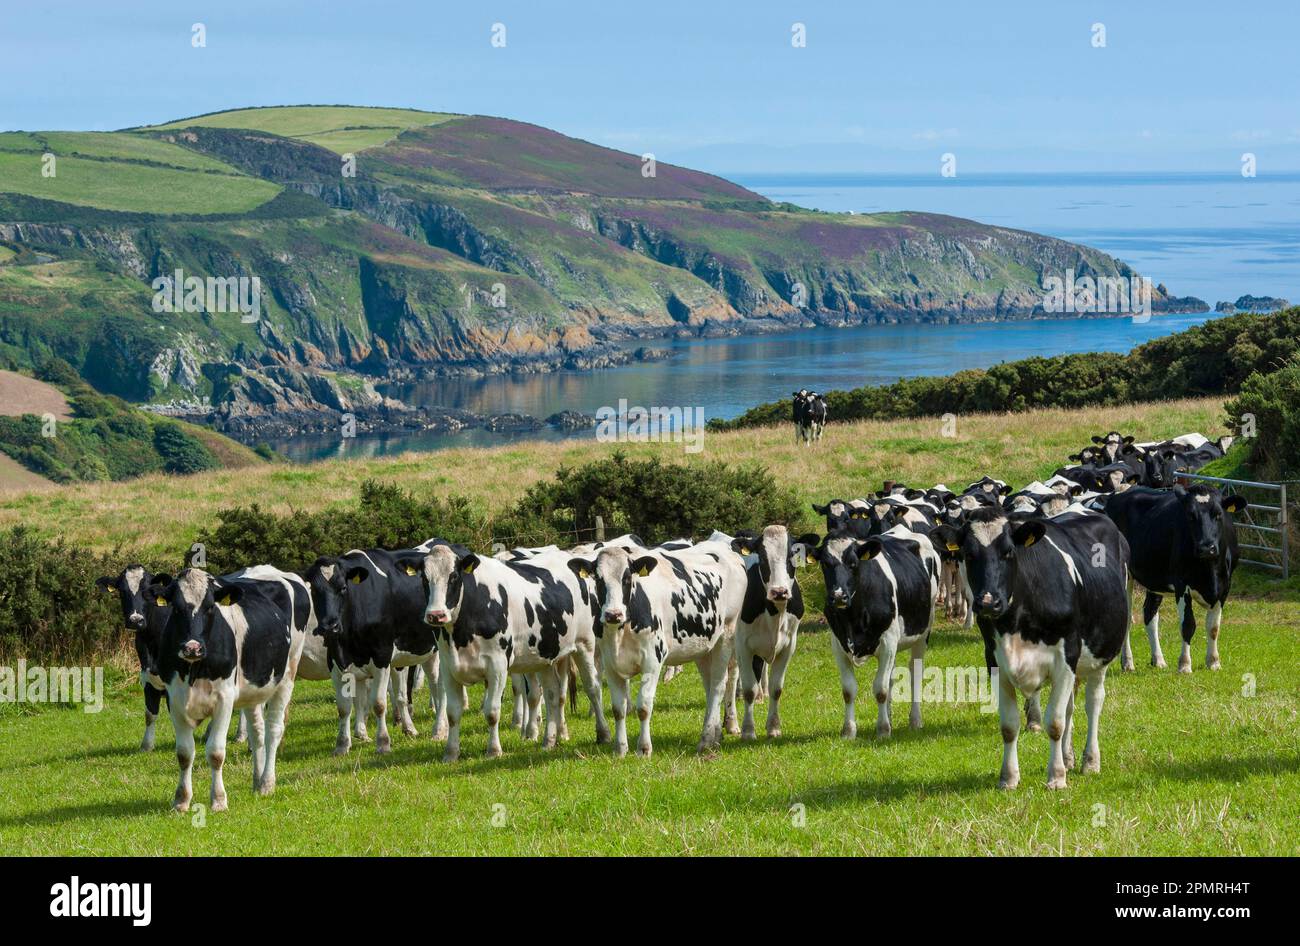 Domestic Cattle, Holstein Friesian type dairy cows, herd standing in coastal pasture, Port Soderick, Isle of Man Stock Photo